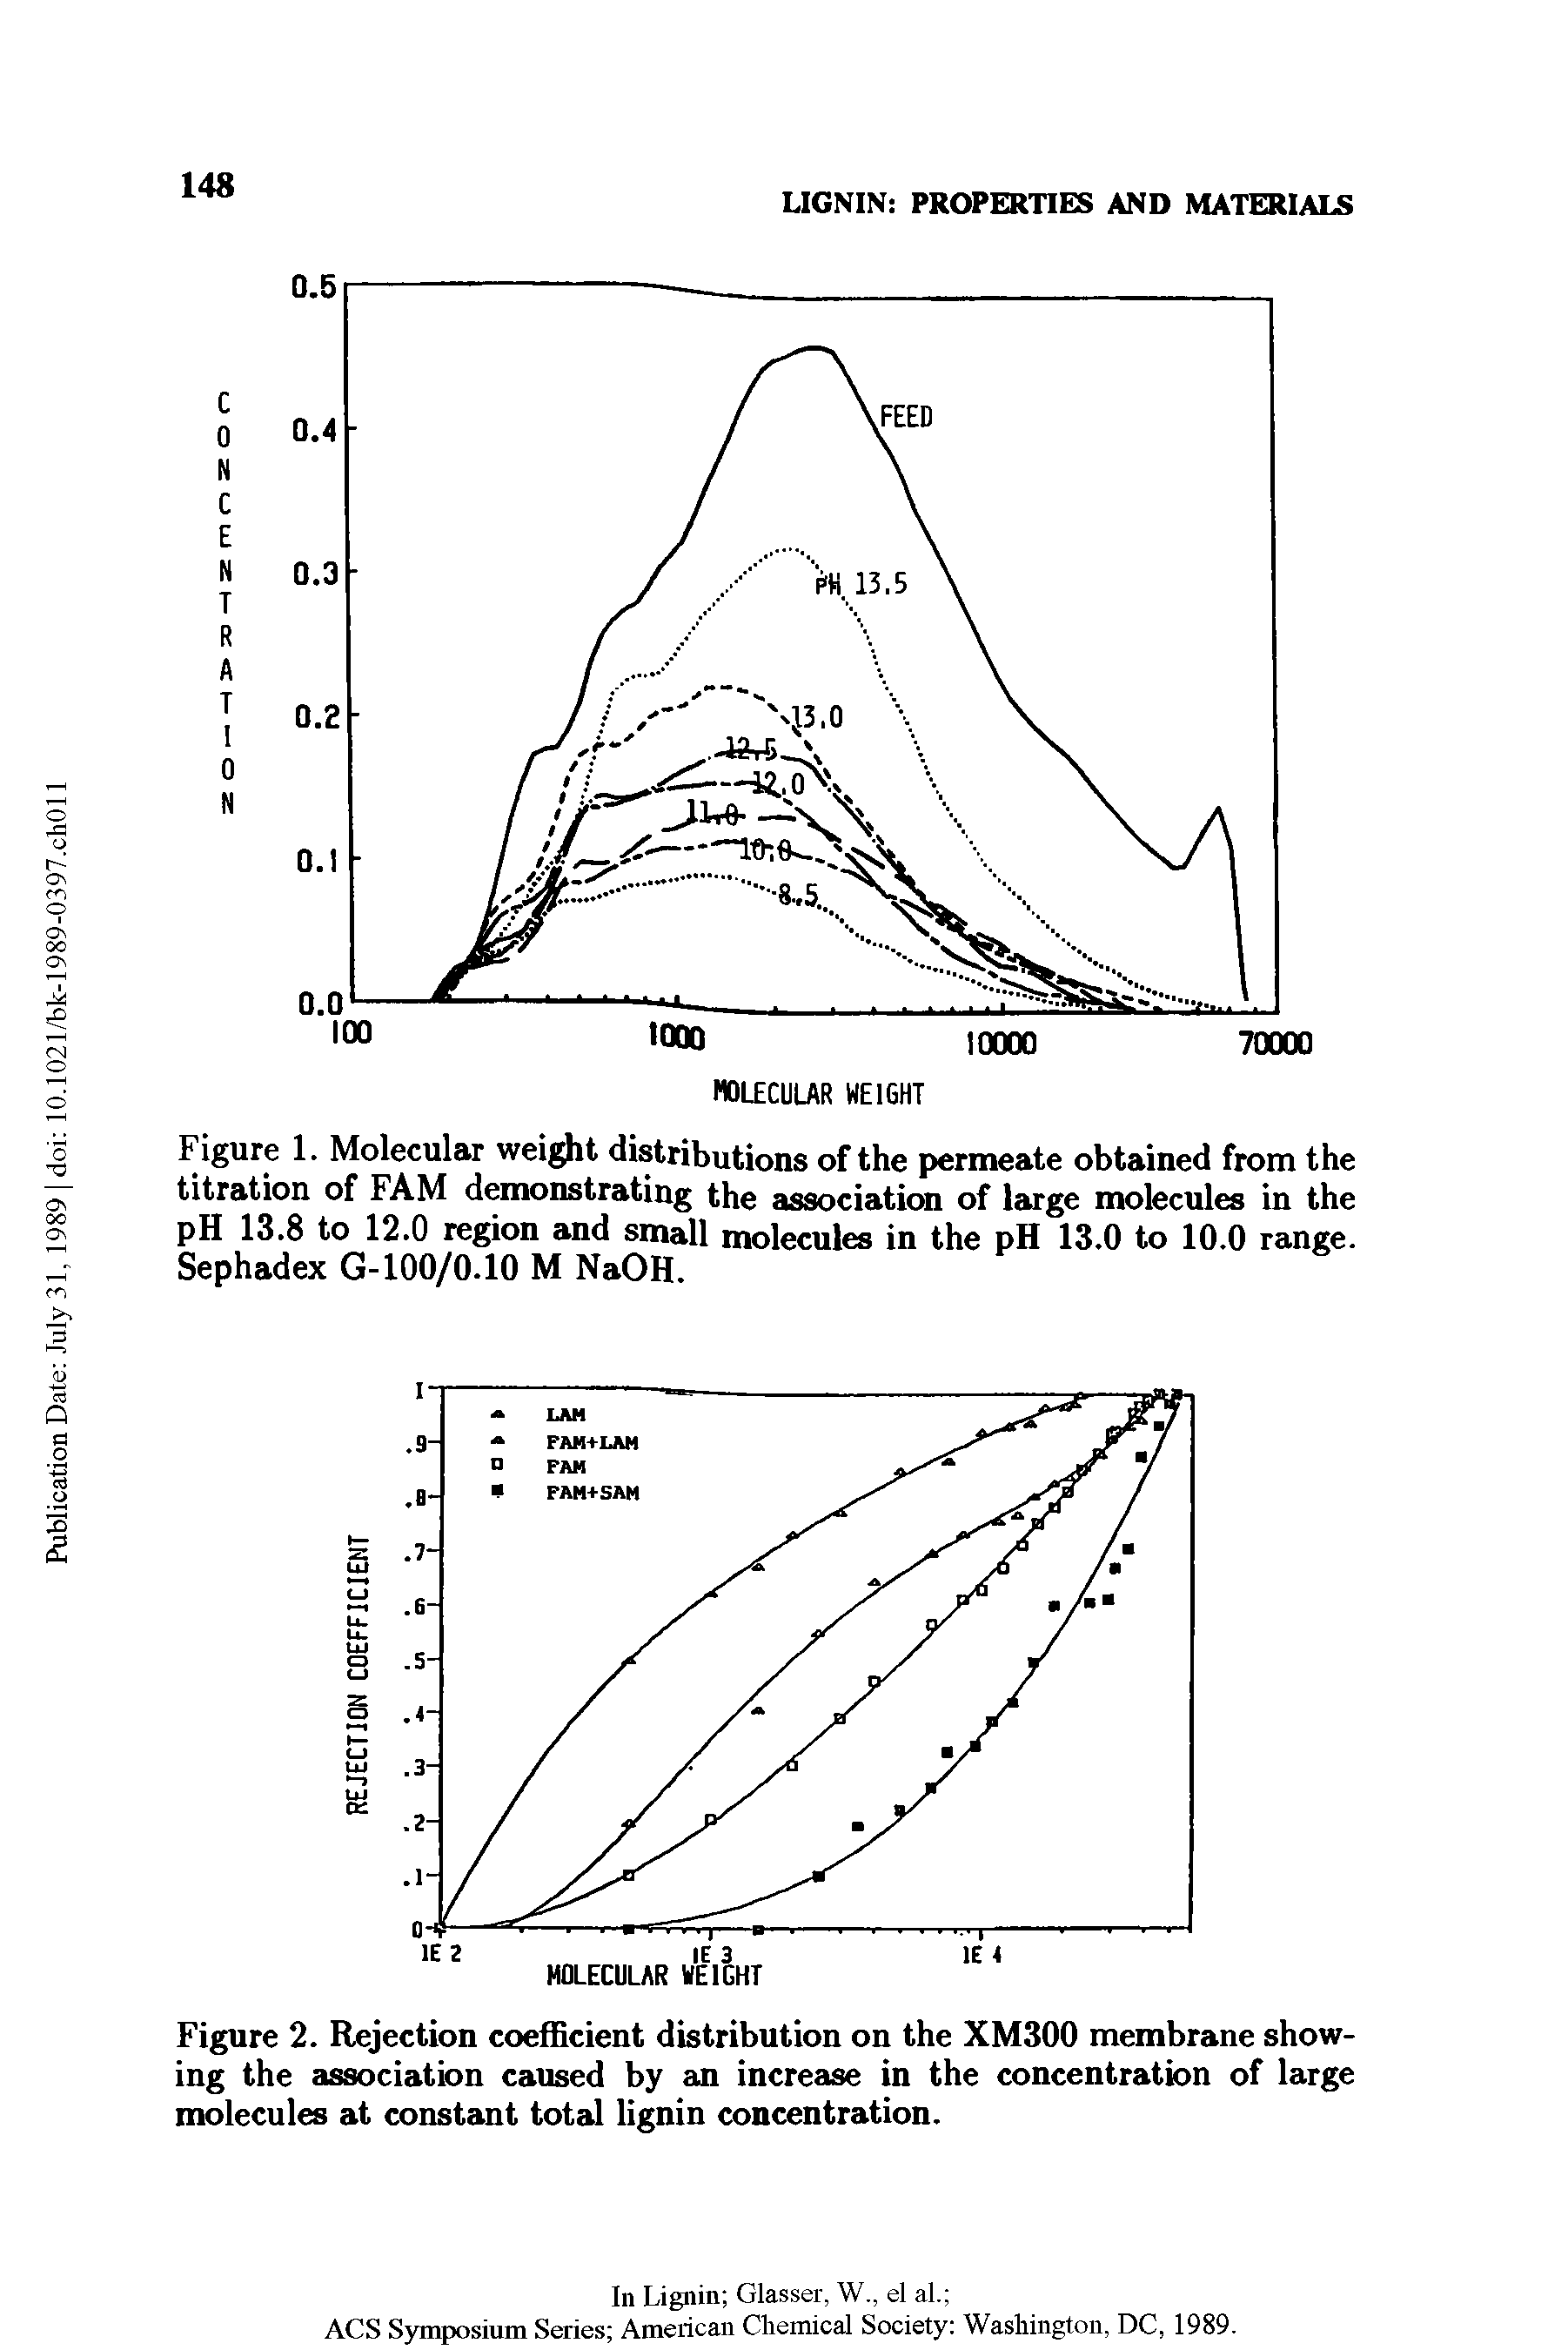 Figure 2. Rejection coefficient distribution on the XM300 membrane showing the association caused by an increase in the concentration of large molecules at constant total lignin concentration.